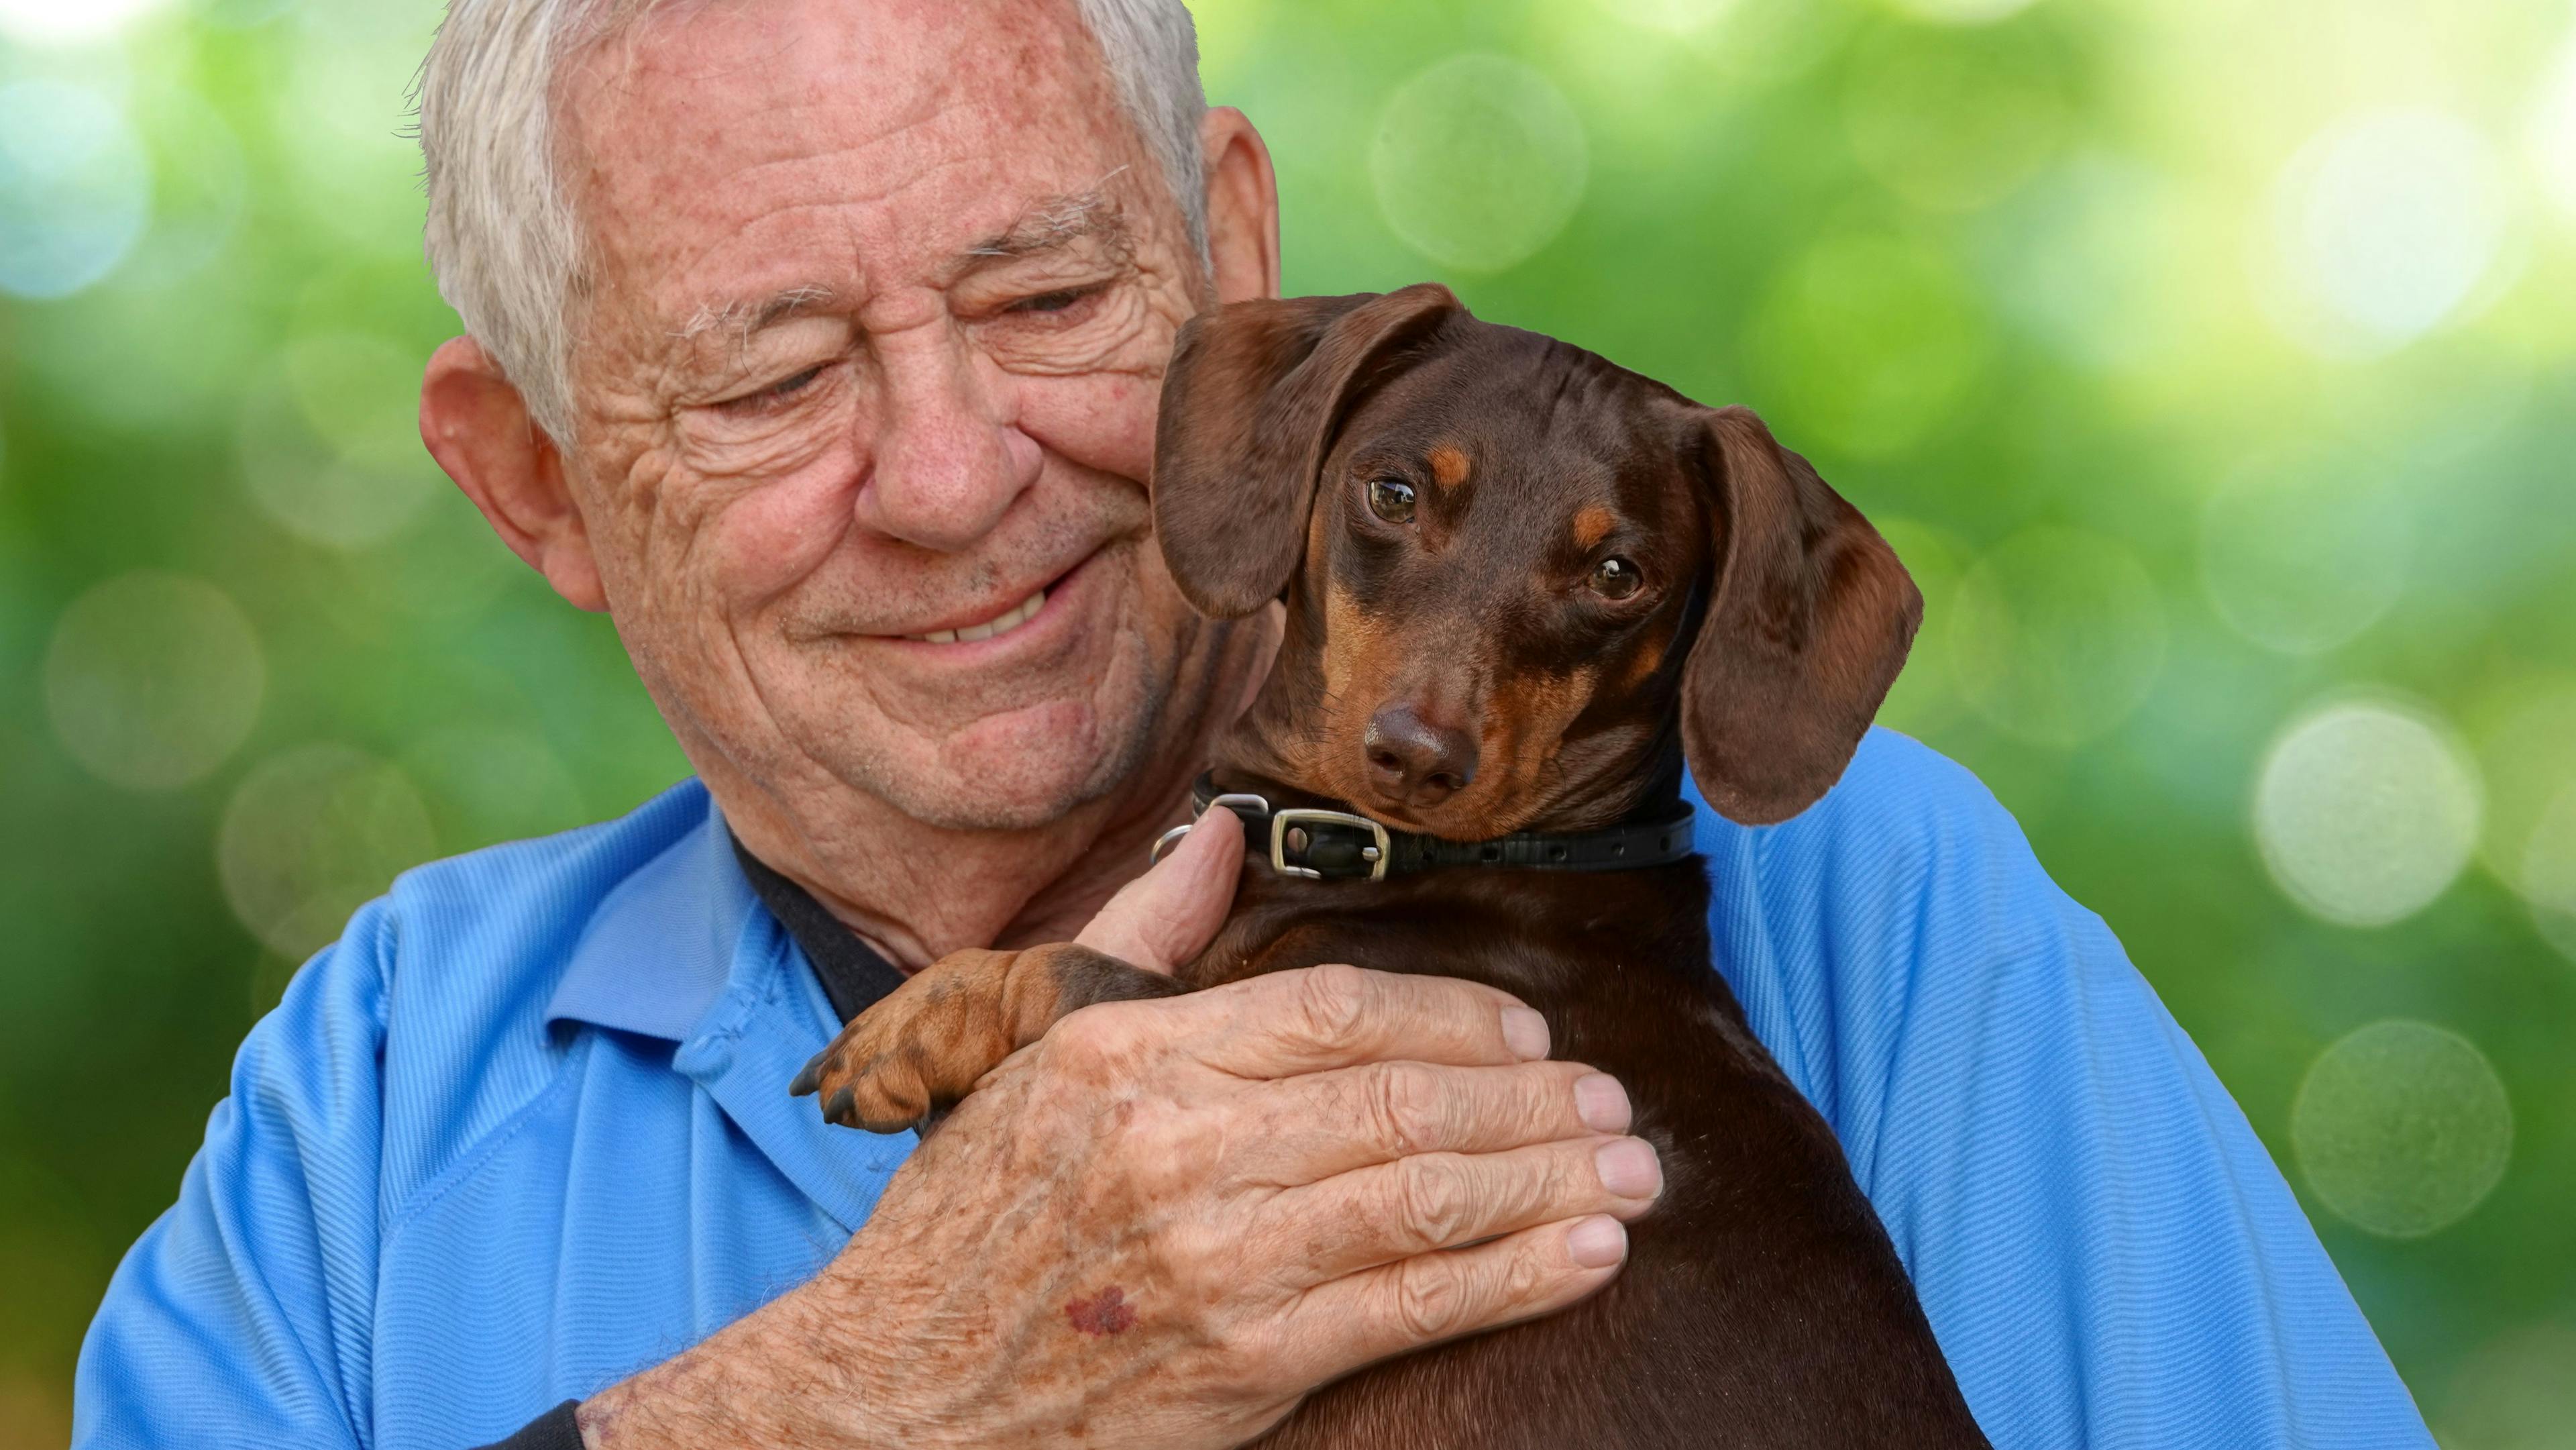 Combatting the ‘loneliness epidemic,’ one pet at a time